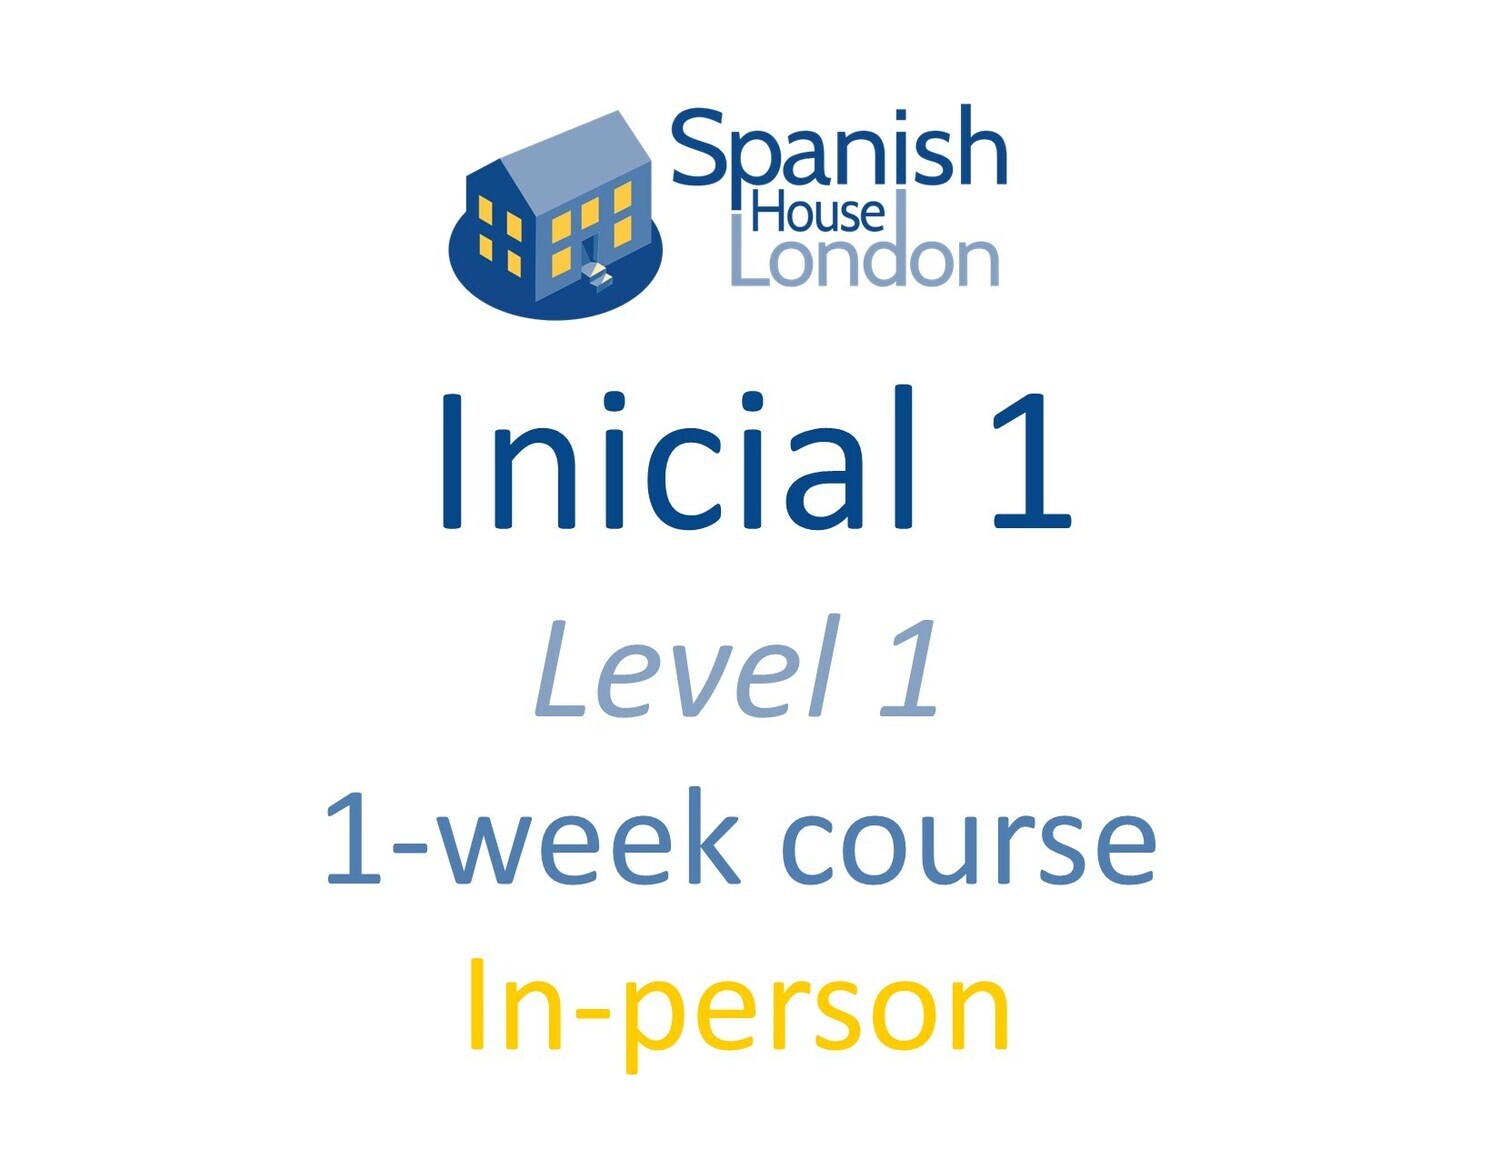 One-Week Intensive Inicial 1 Course starting on 27th November at 10.30am in Clapham North